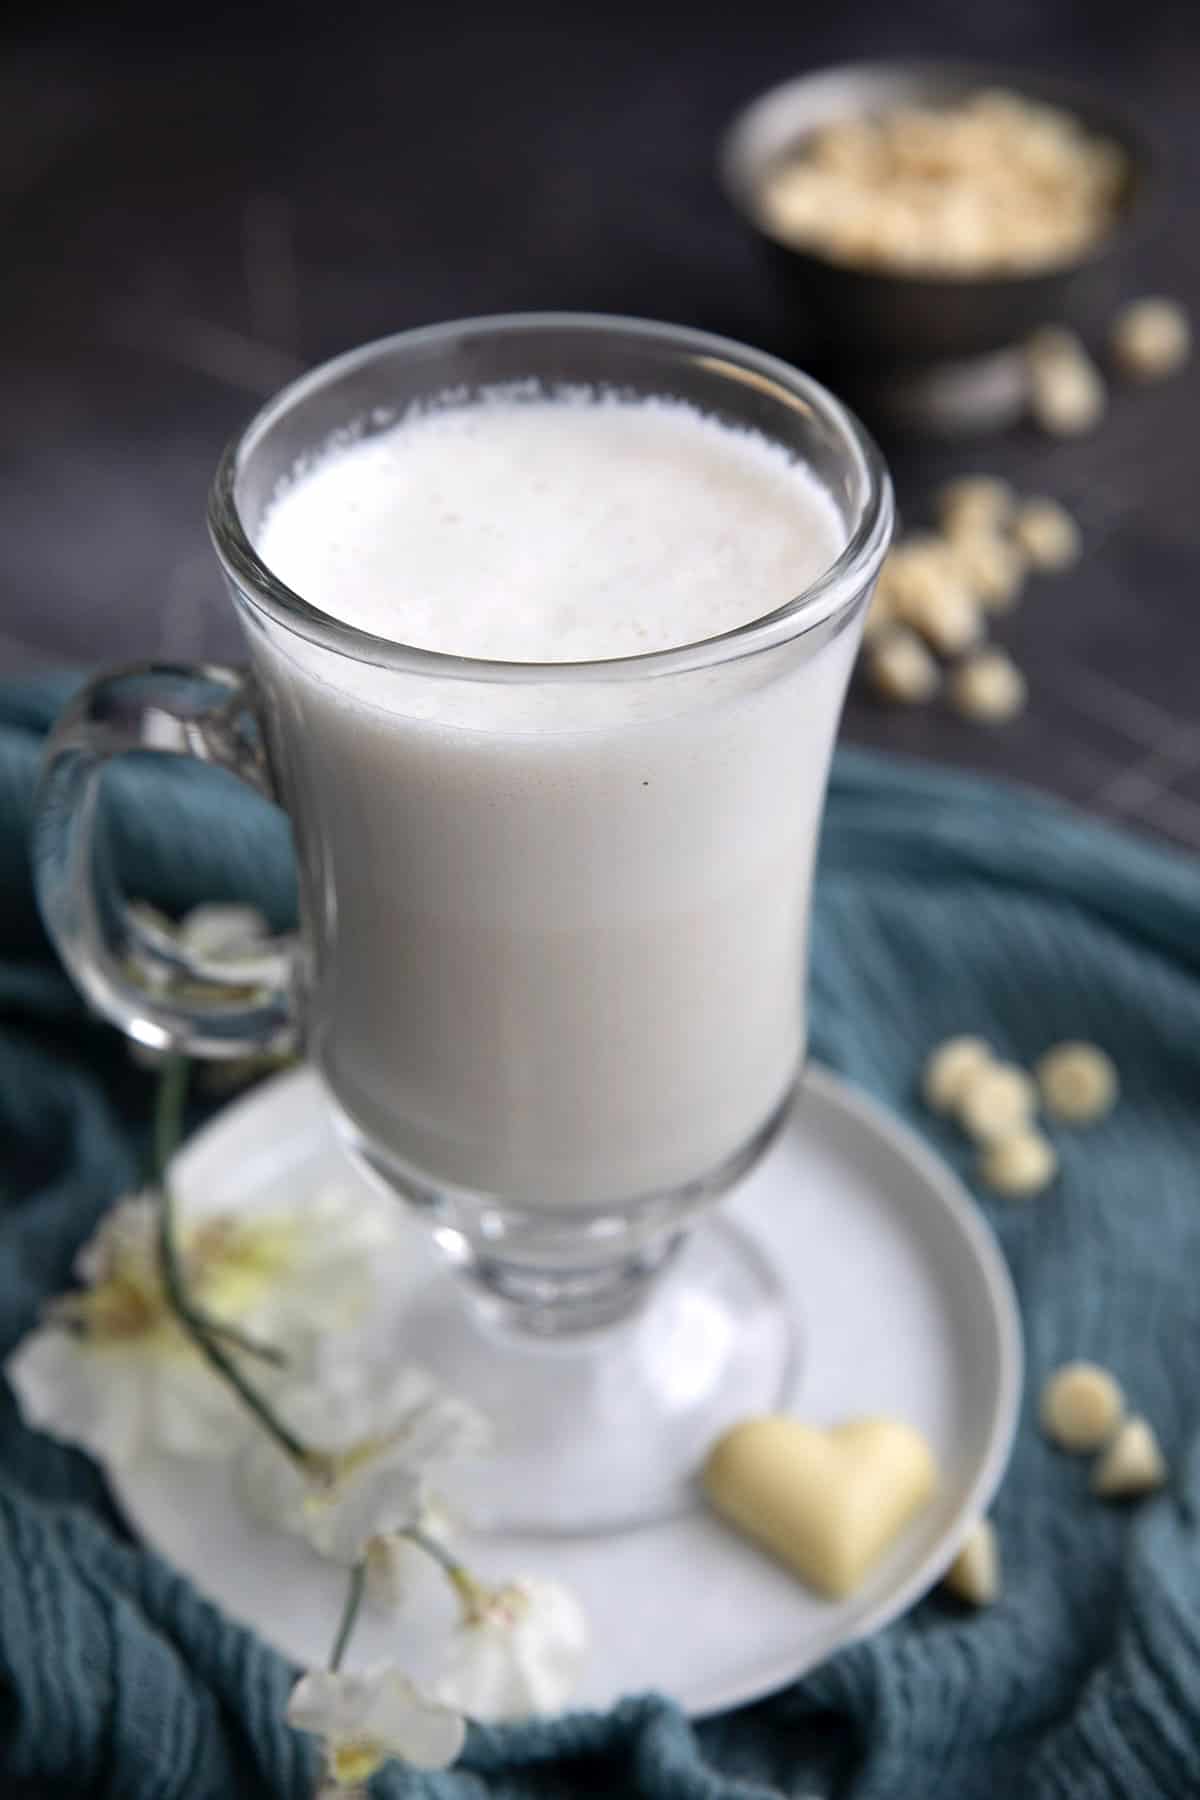 A glass mug filled with white hot chocolate with a bowl of white chocolate chips in the background.